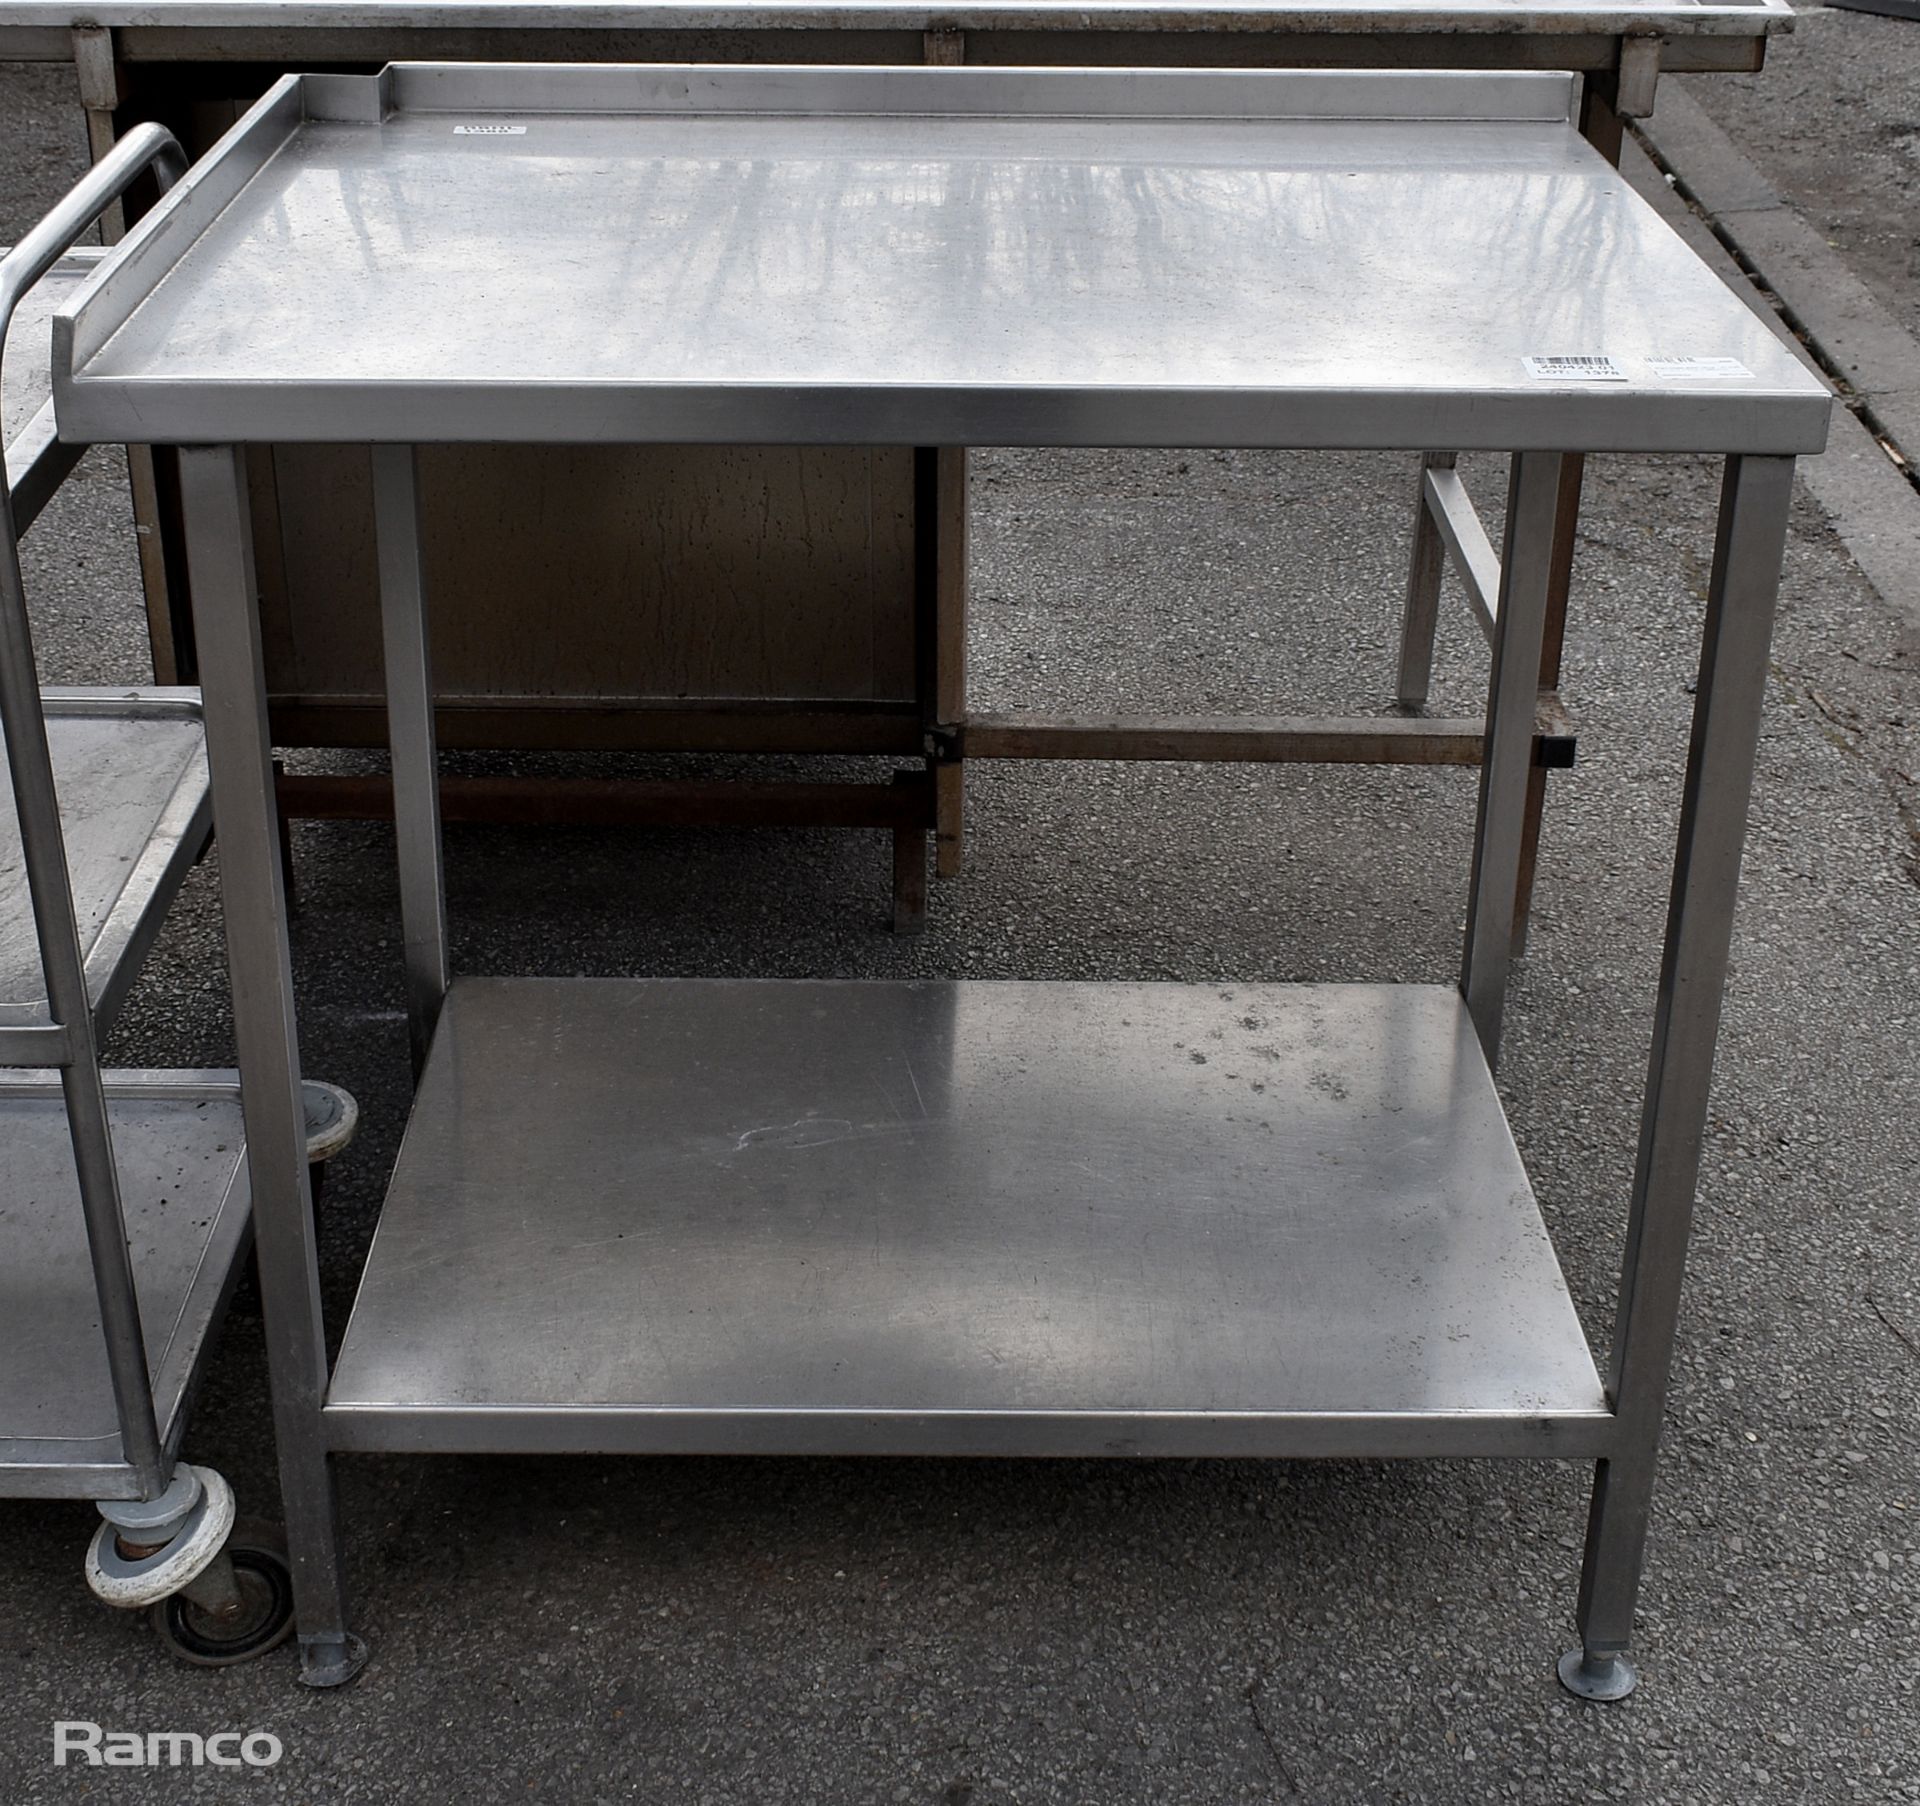 Stainless steel table - W 920 x D 700 x H 880mm